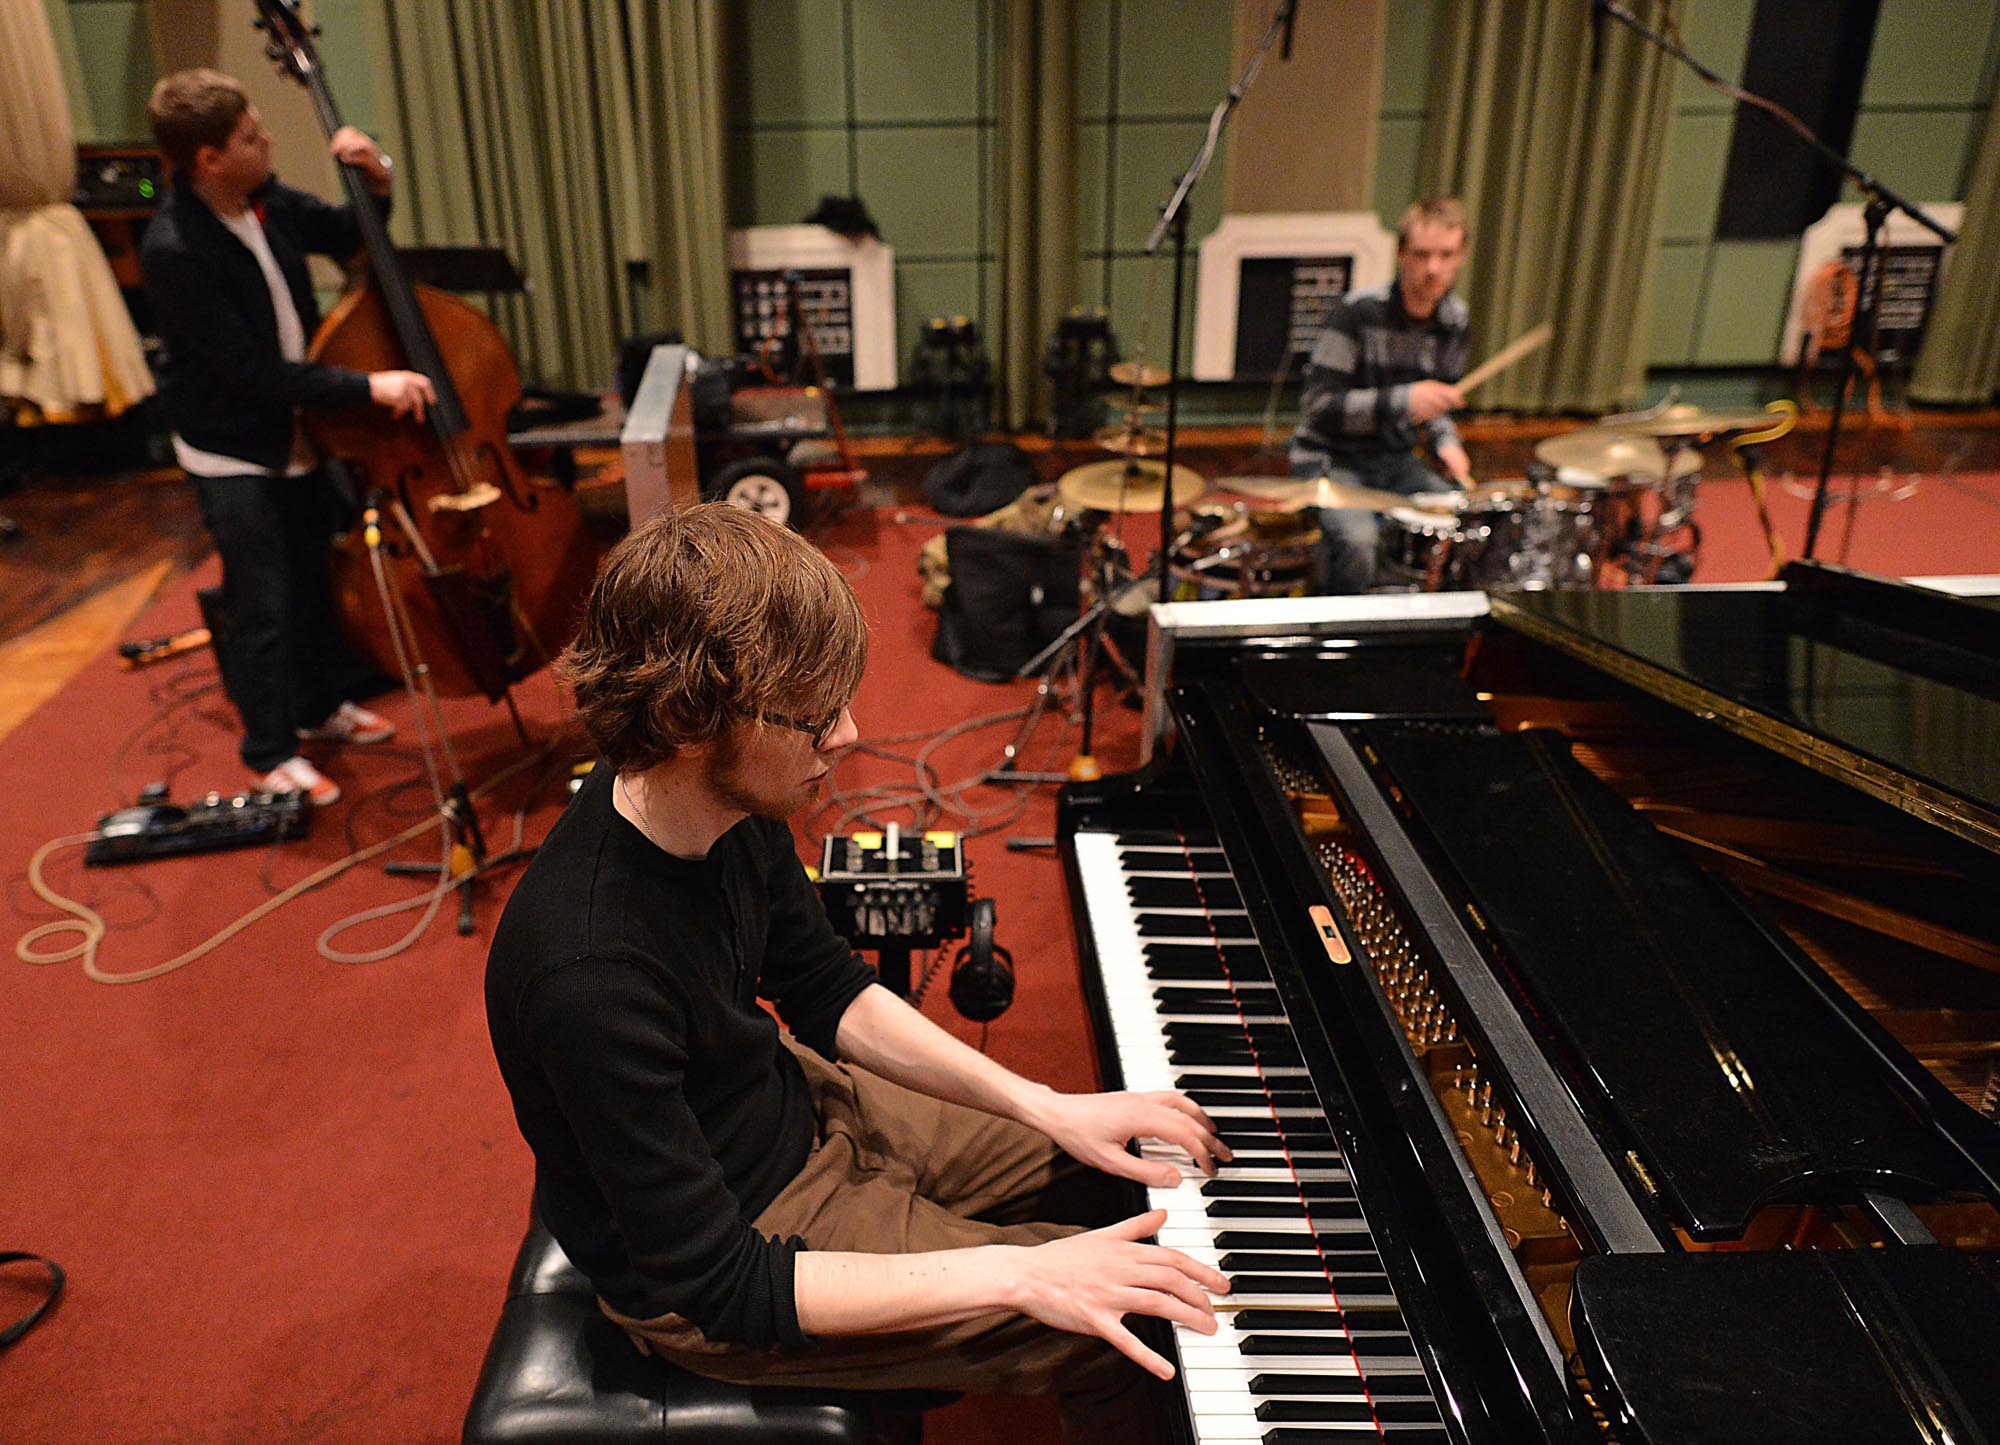 14/05/2013 – Check out GoGo Penguin’s Maida Vale session for Jamie Cullum’s show on BBC Radio 2